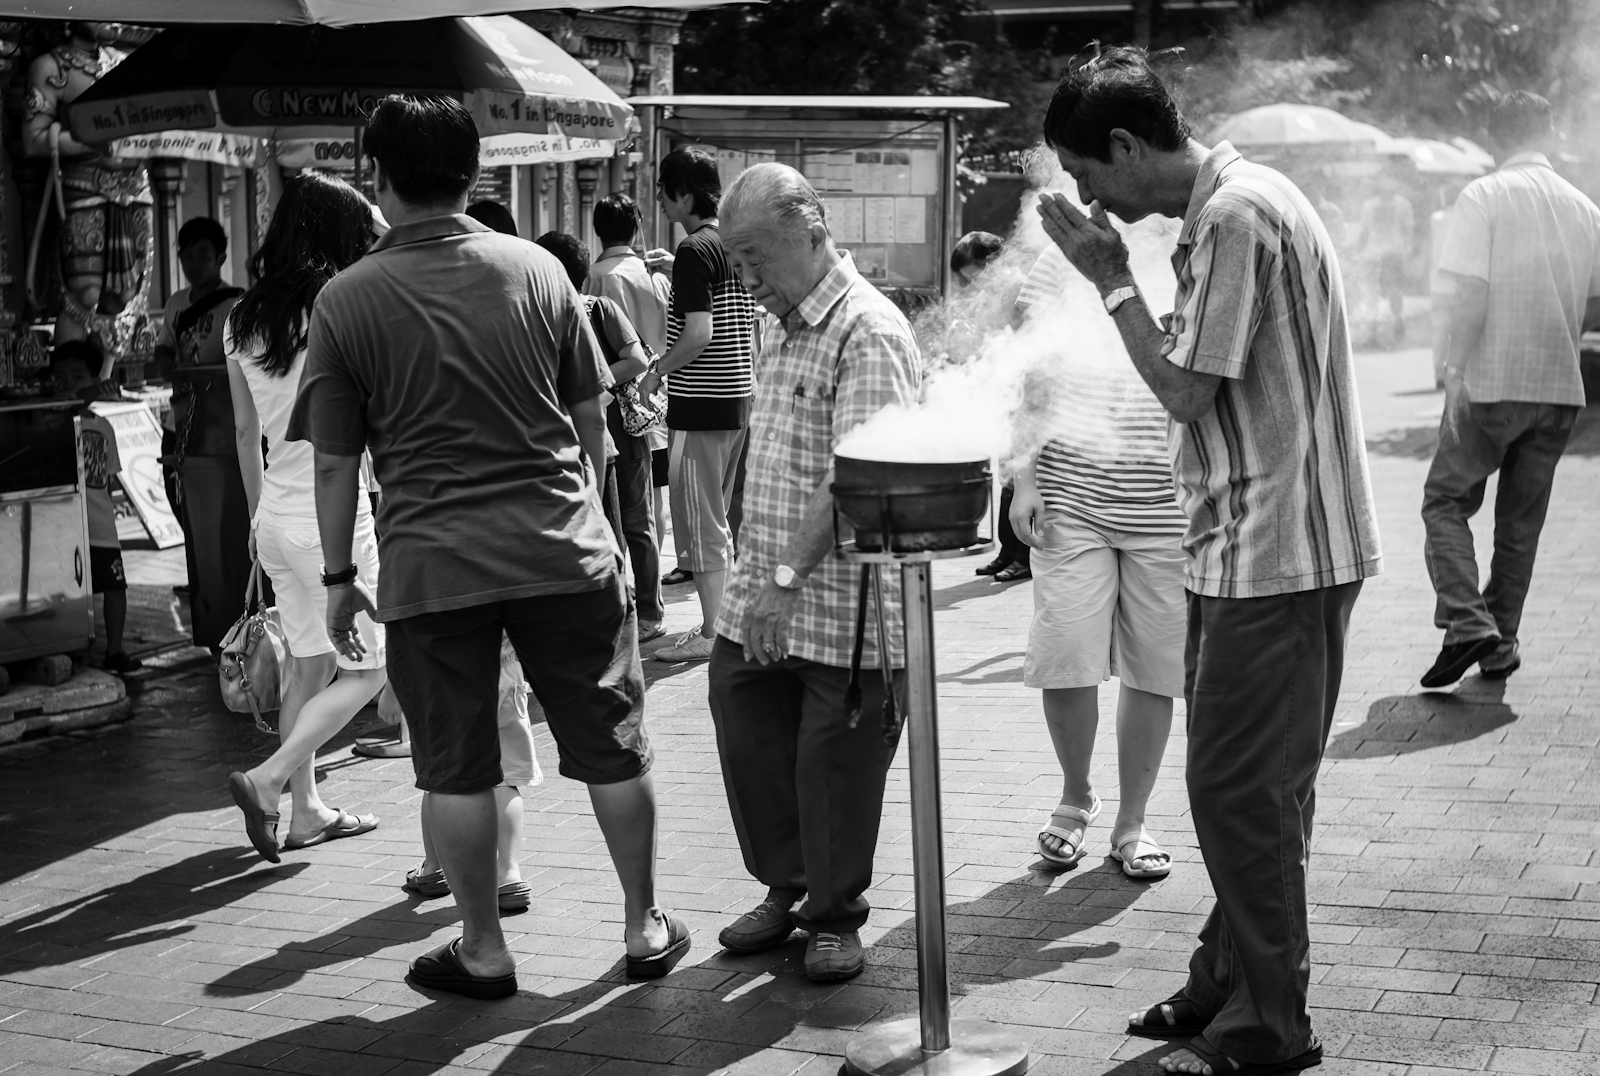 Street photography - A man praying in Chinatown